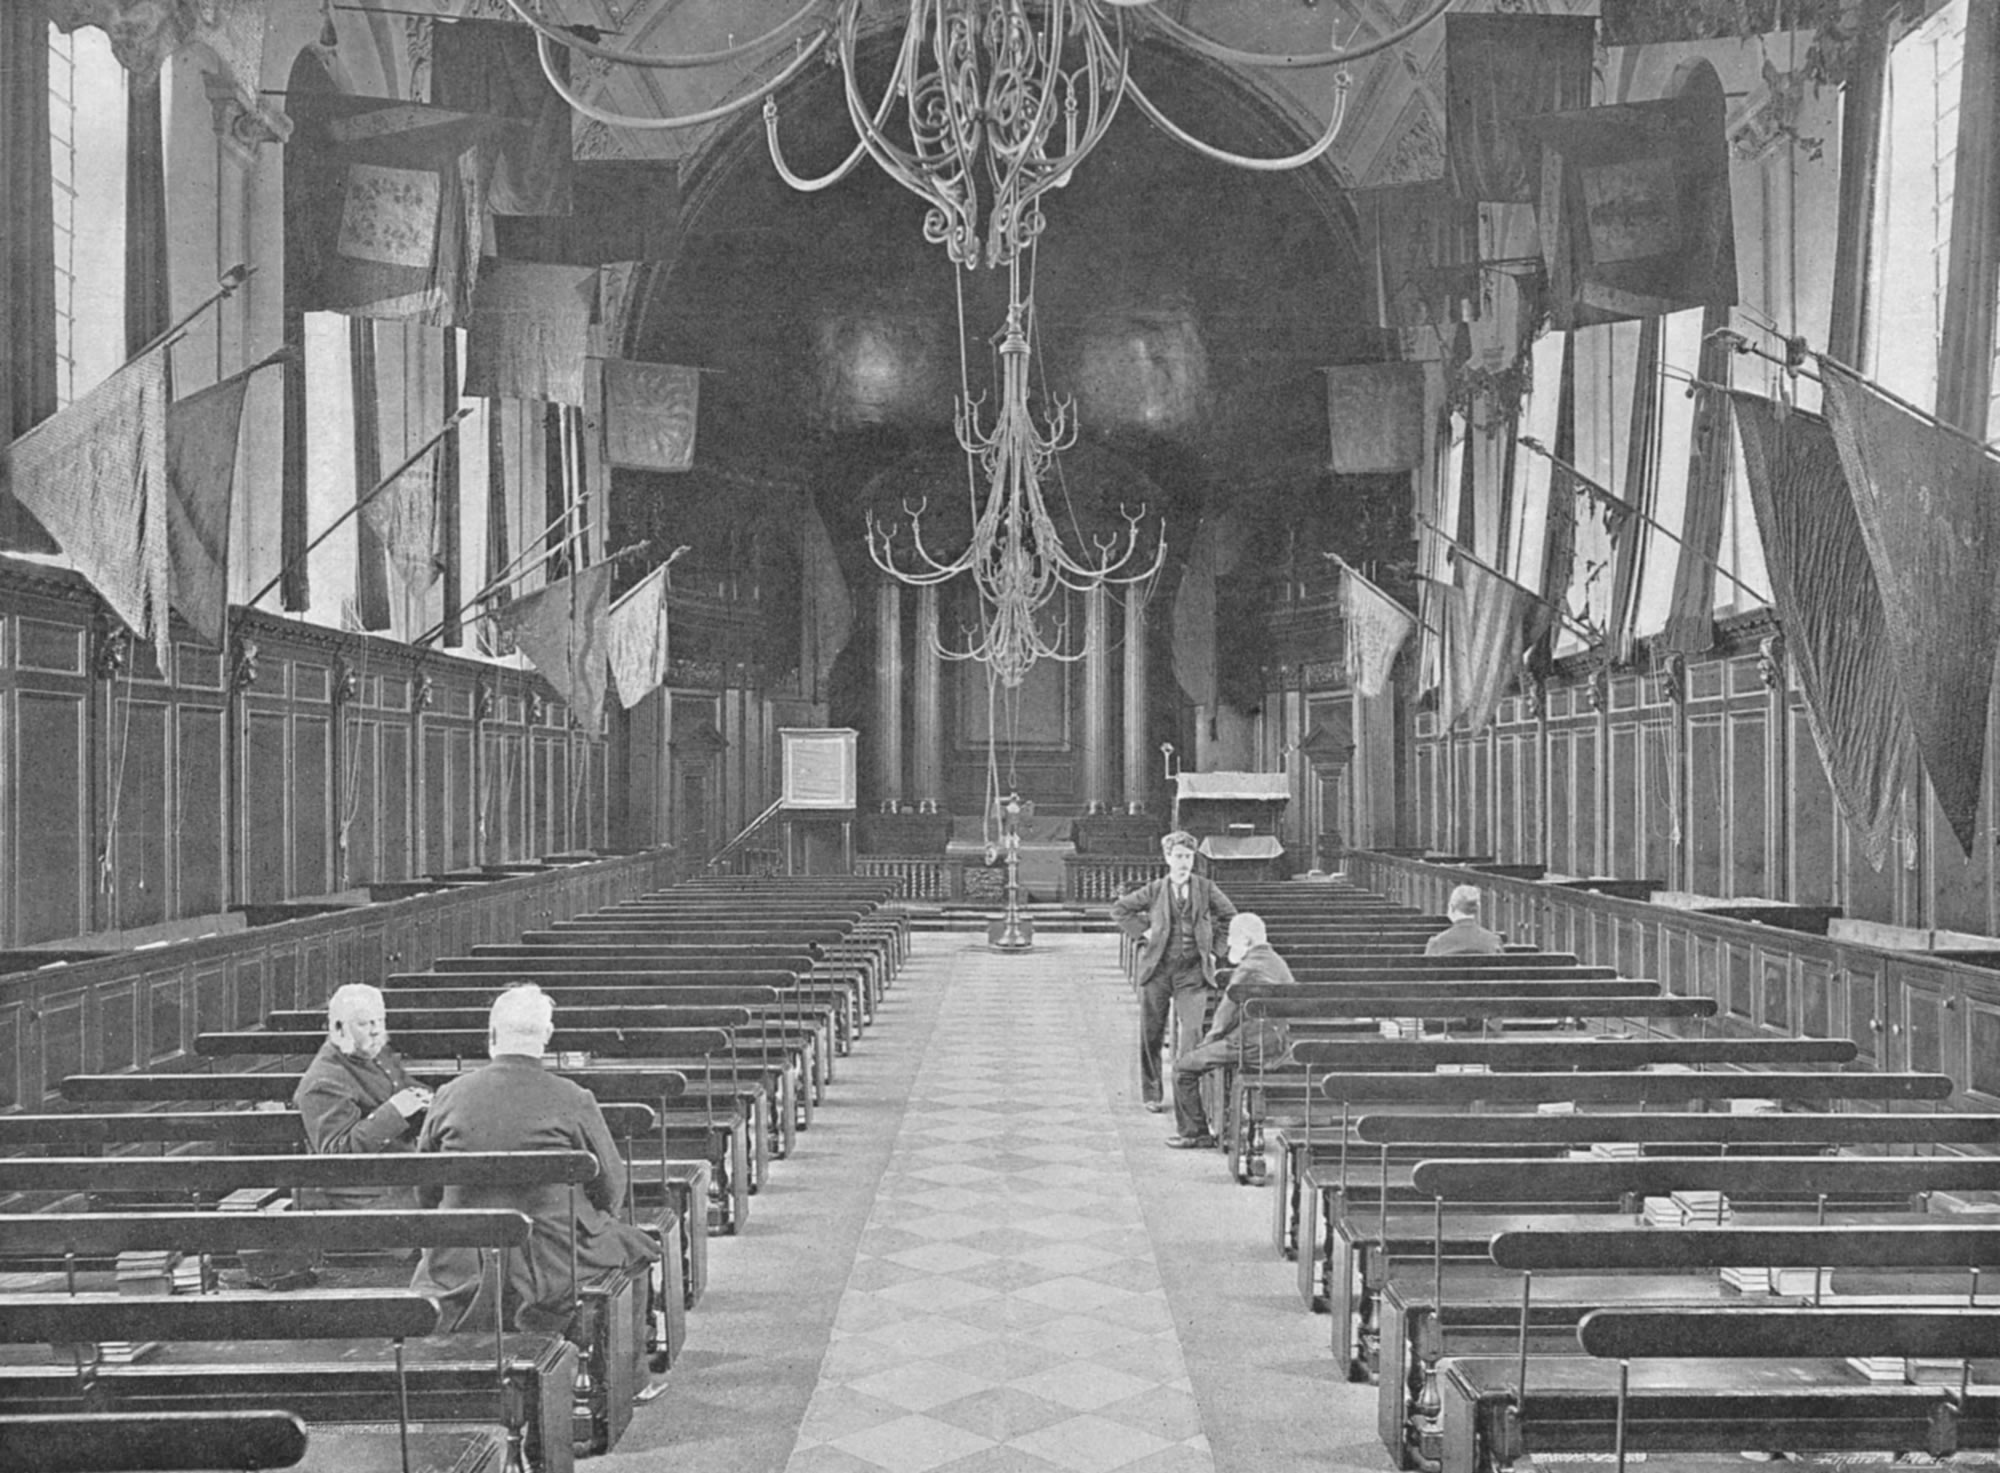 The Chapel at the Royal Hospital Chelsea from TheGenealogist's Image Archive